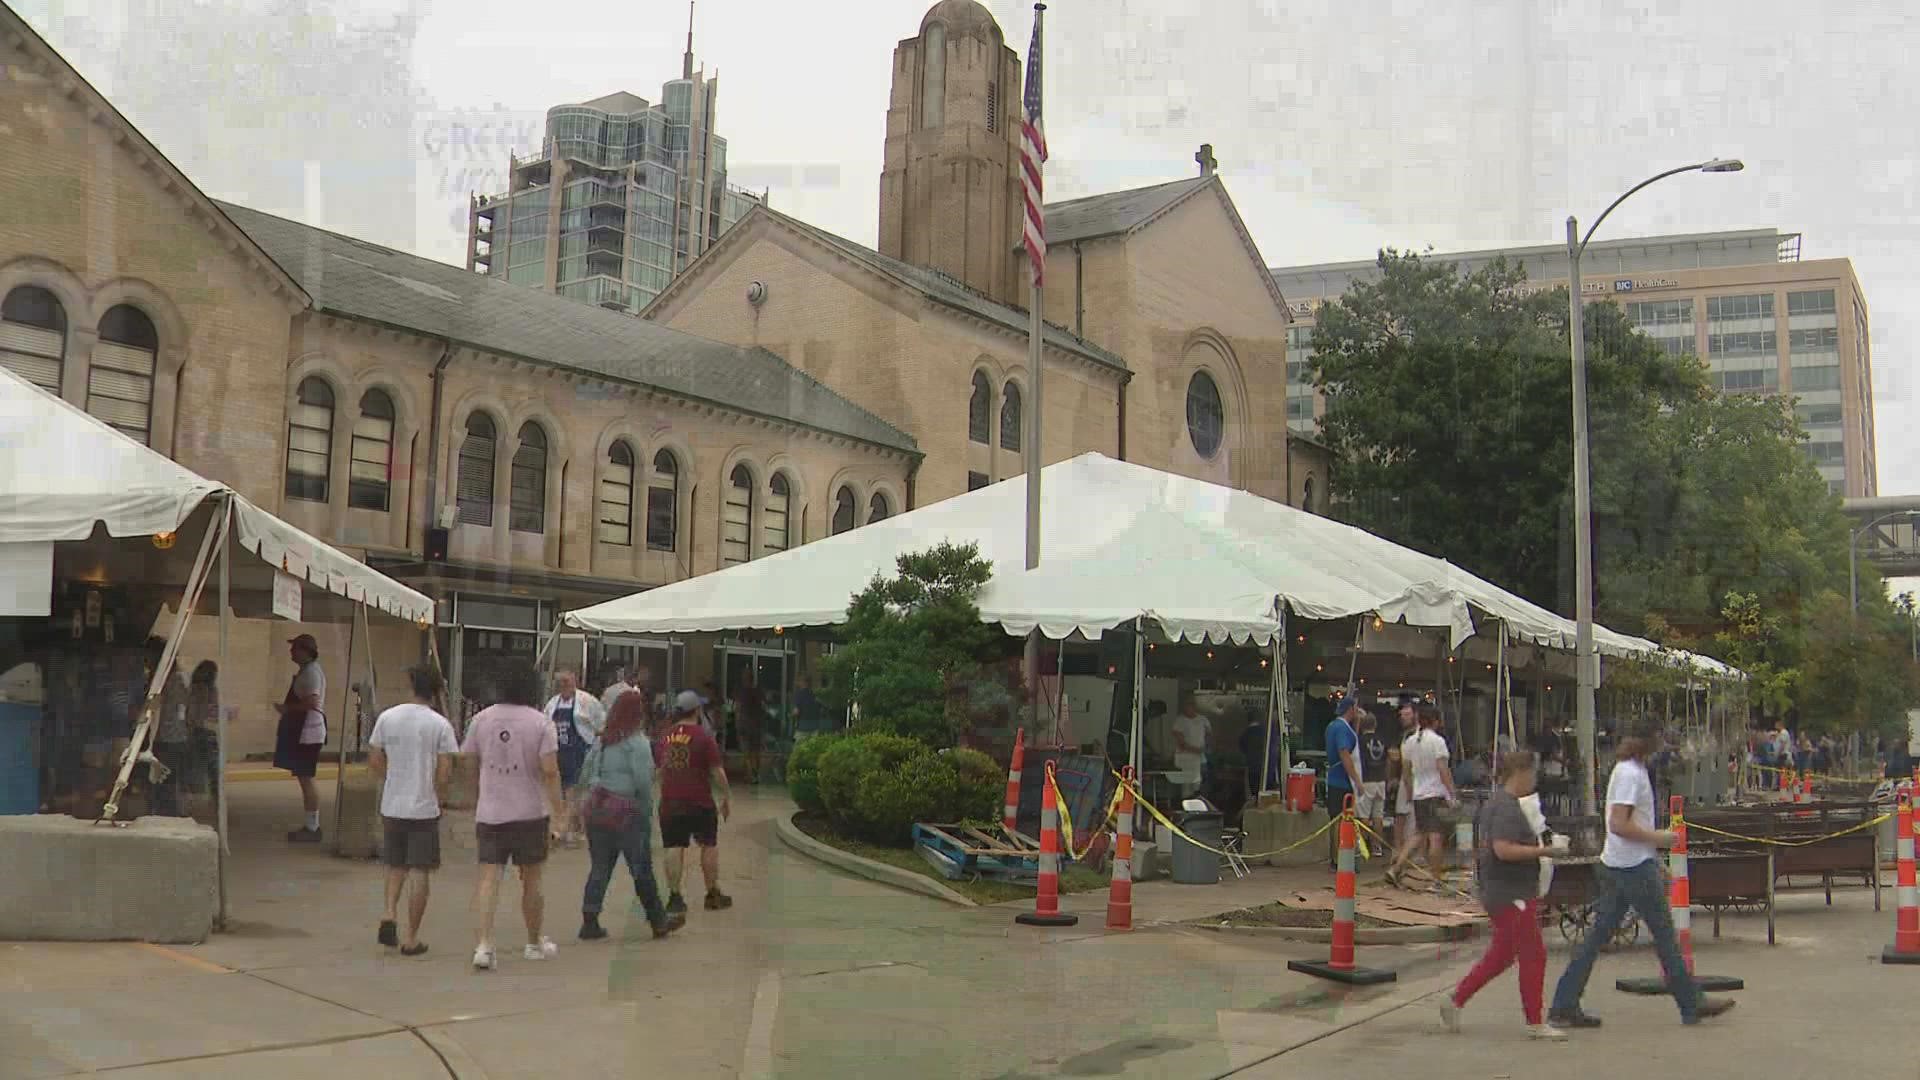 The rain didn't stop large crowds from enjoying the Greek Festival hosted by St. Nicholas Greek Orthodox Church. This comes after two years of no in-person events.